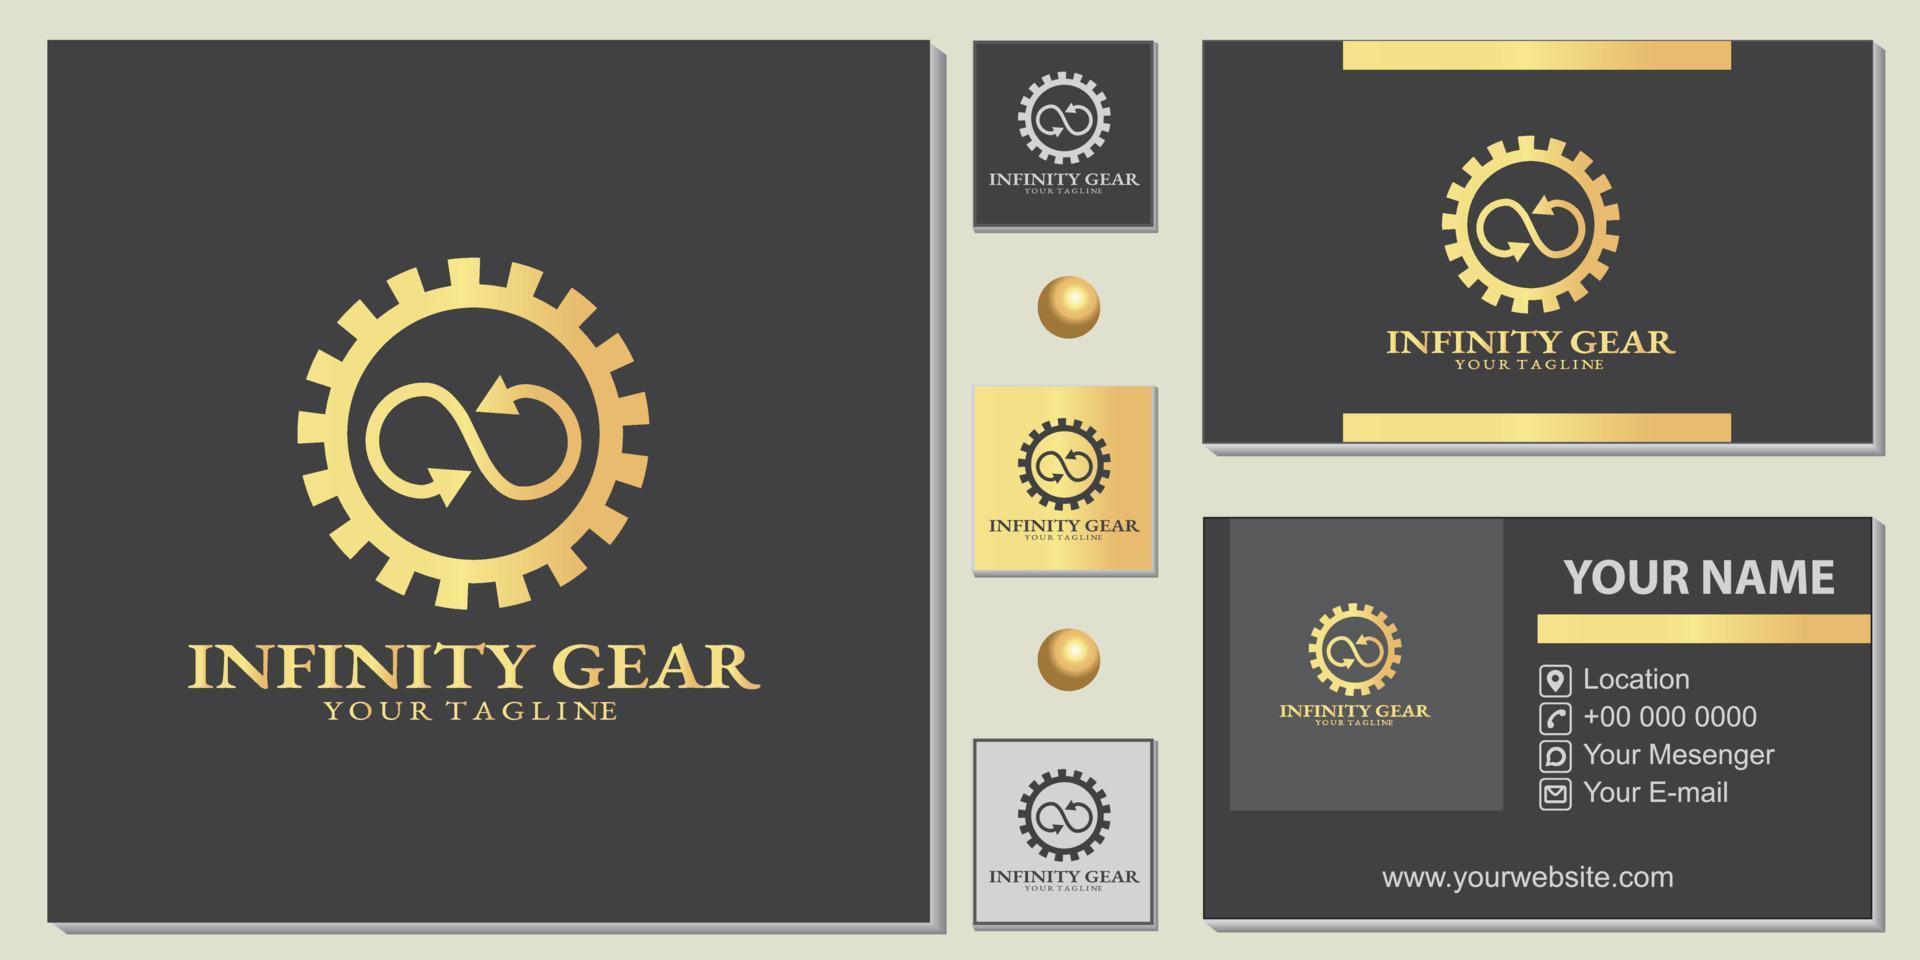 Luxury gold infinity gear logo premium template with elegant business card vector eps 10